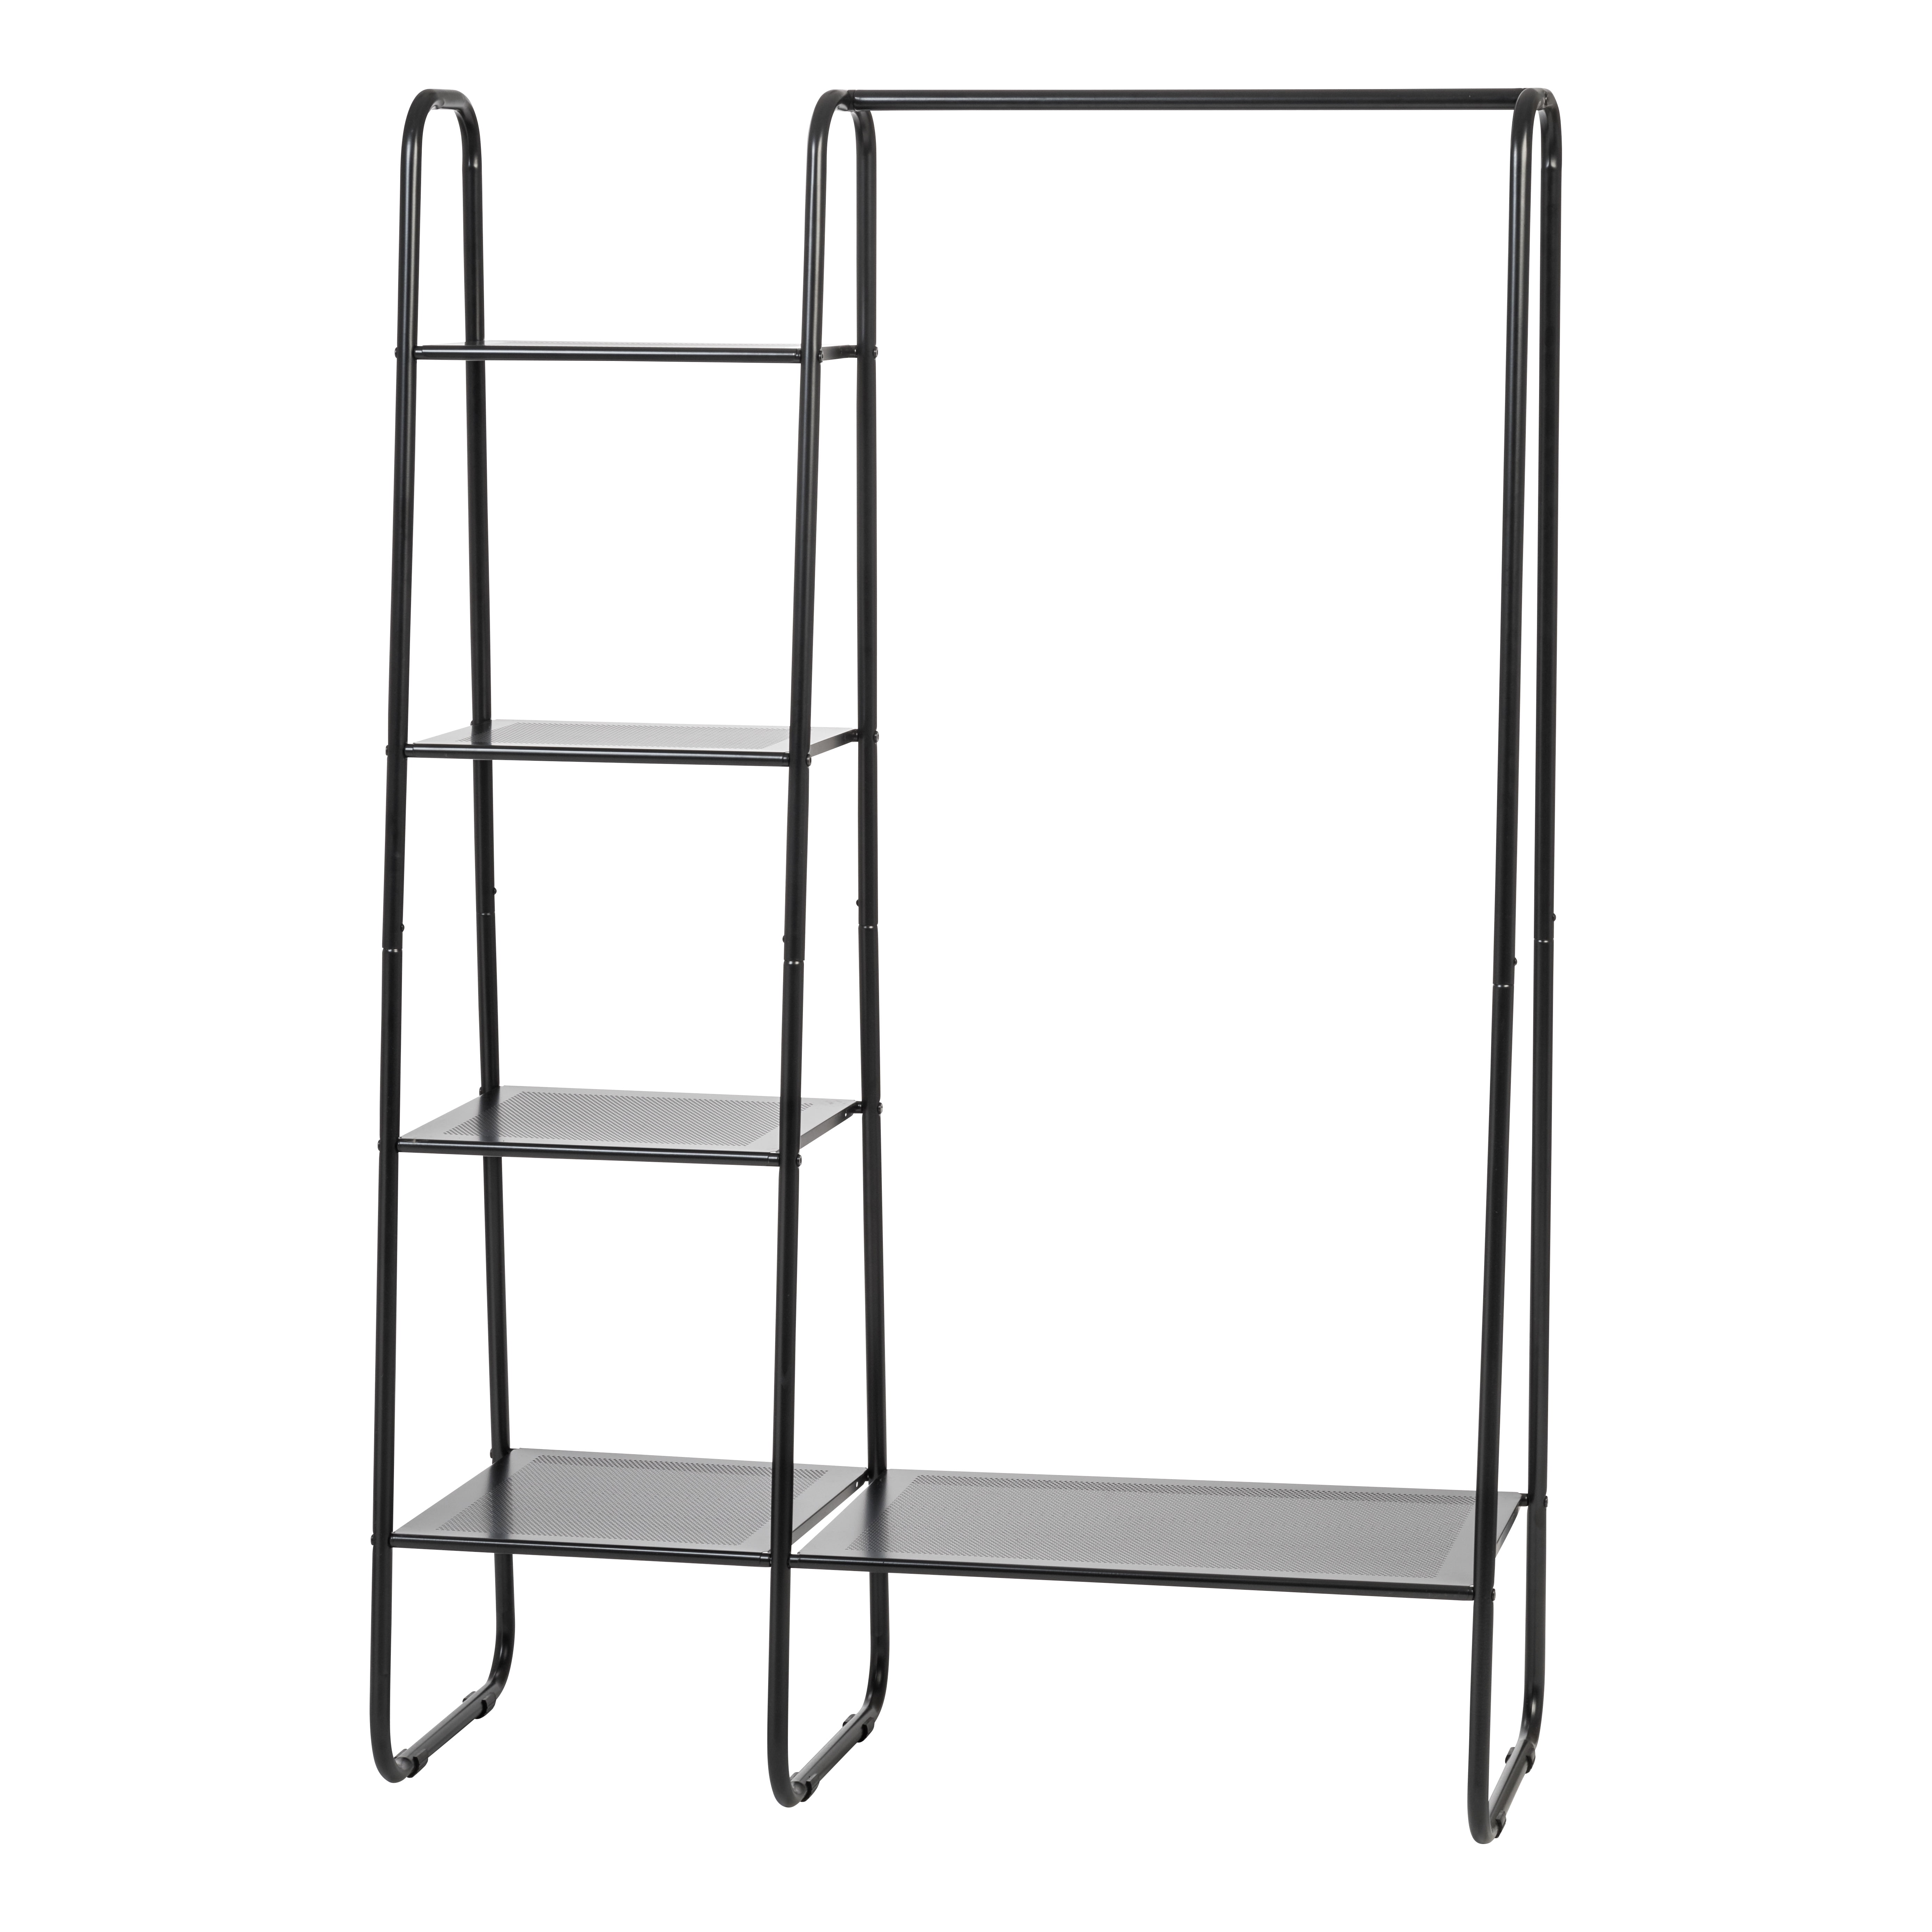 IRIS USA 5 Shelf Garment and Accessories Rack for Hanging and ...